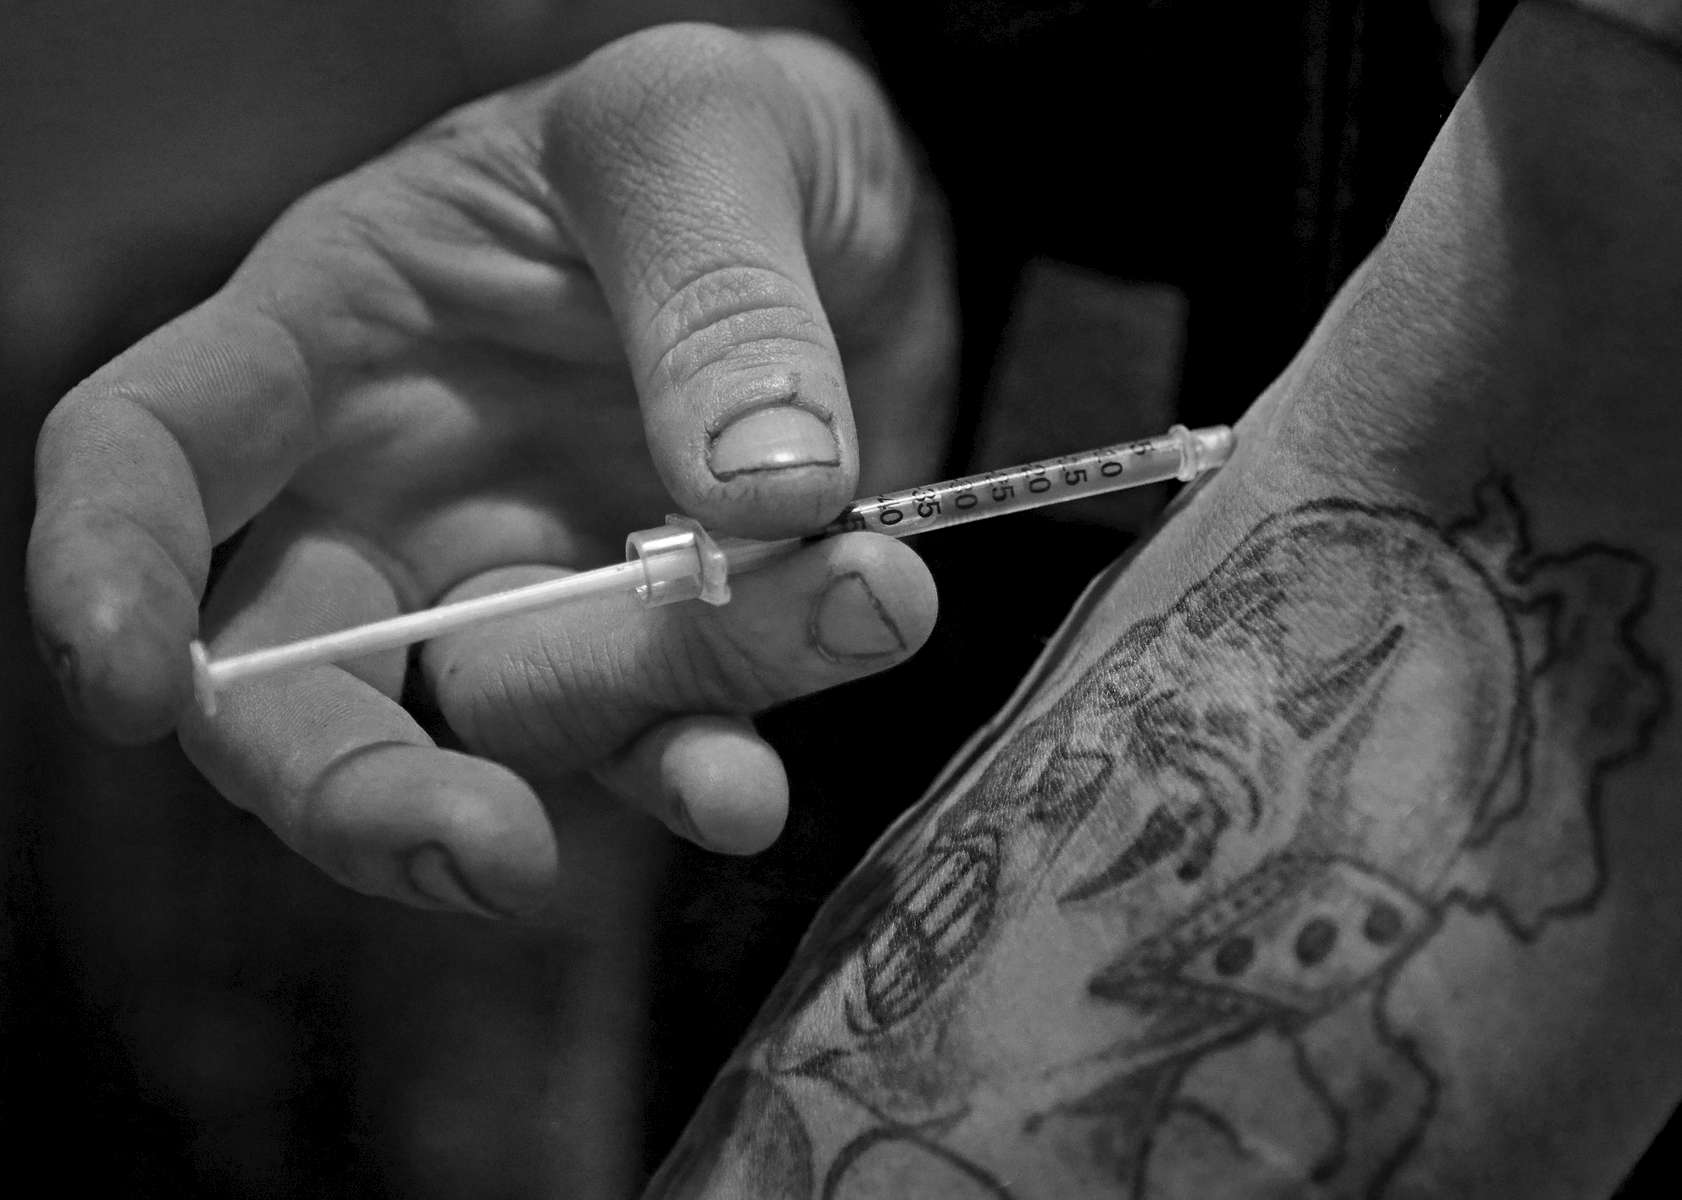 Richard Skinner shoots heroin on Monday, Feb. 6, 2017, into a vein near a tattoo he got during a stint in prison years earlier.  {quote}Heroin is the only thing that ever stole my soul. I'm not me any more{quote} says Skinner. Skinner who had to be revived by paramedics from a a near fatal overdose just a few weeks ago {quote}Death ain't nothing to me anymore{quote}  